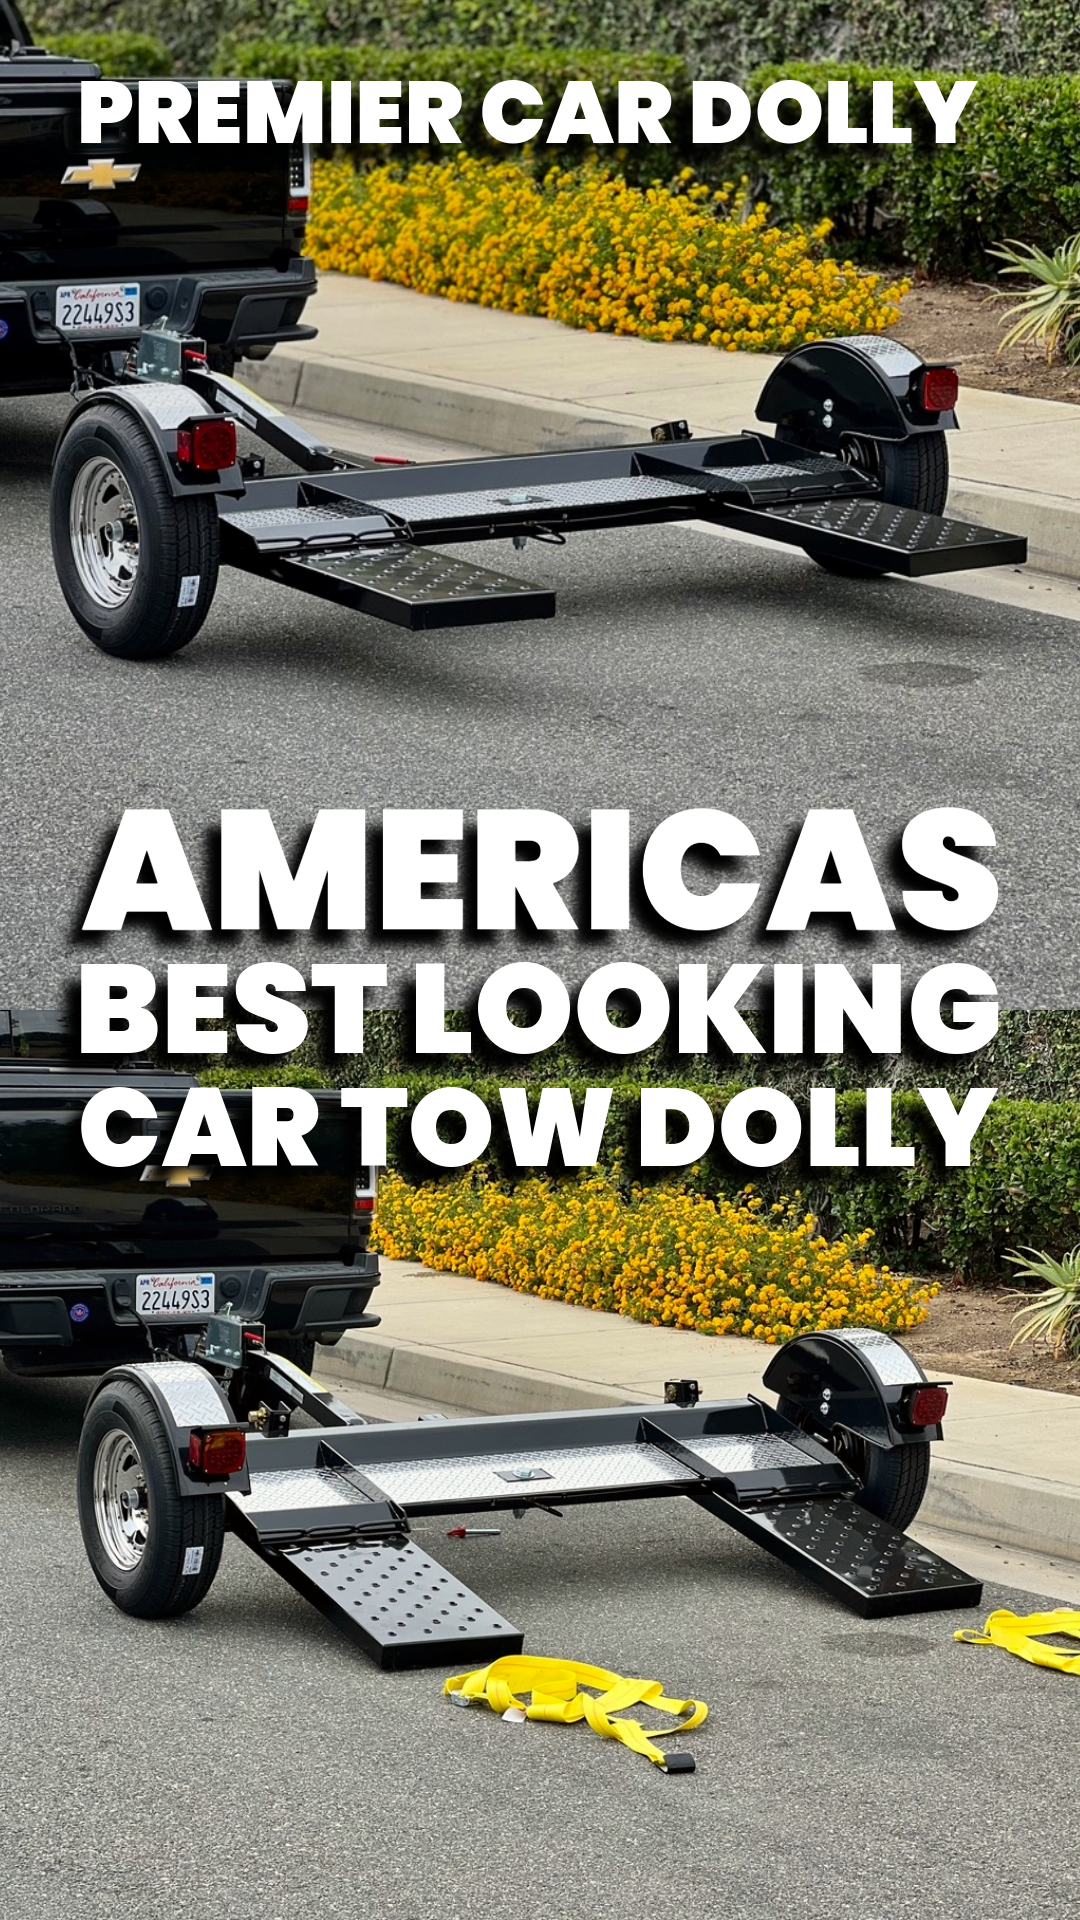 Rent a car tow dolly - Convenient and reliable towing rentals near you